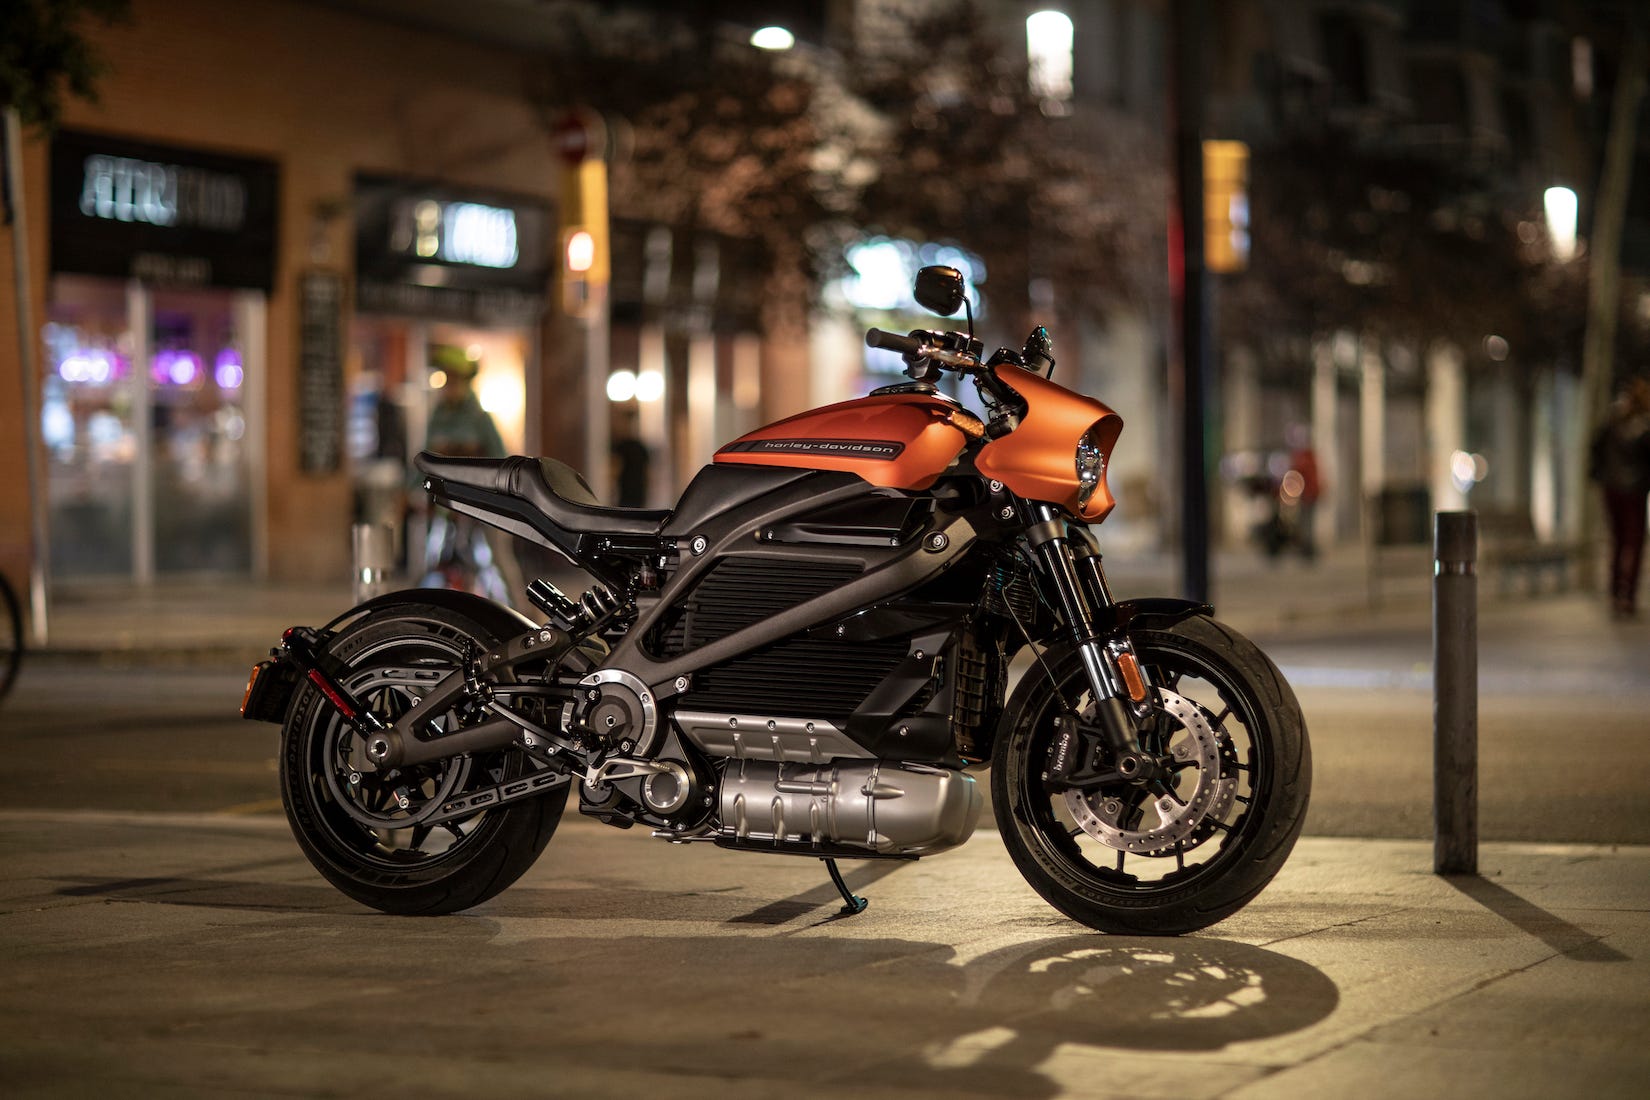 unveils production-ready LiveWire electric motorcycle